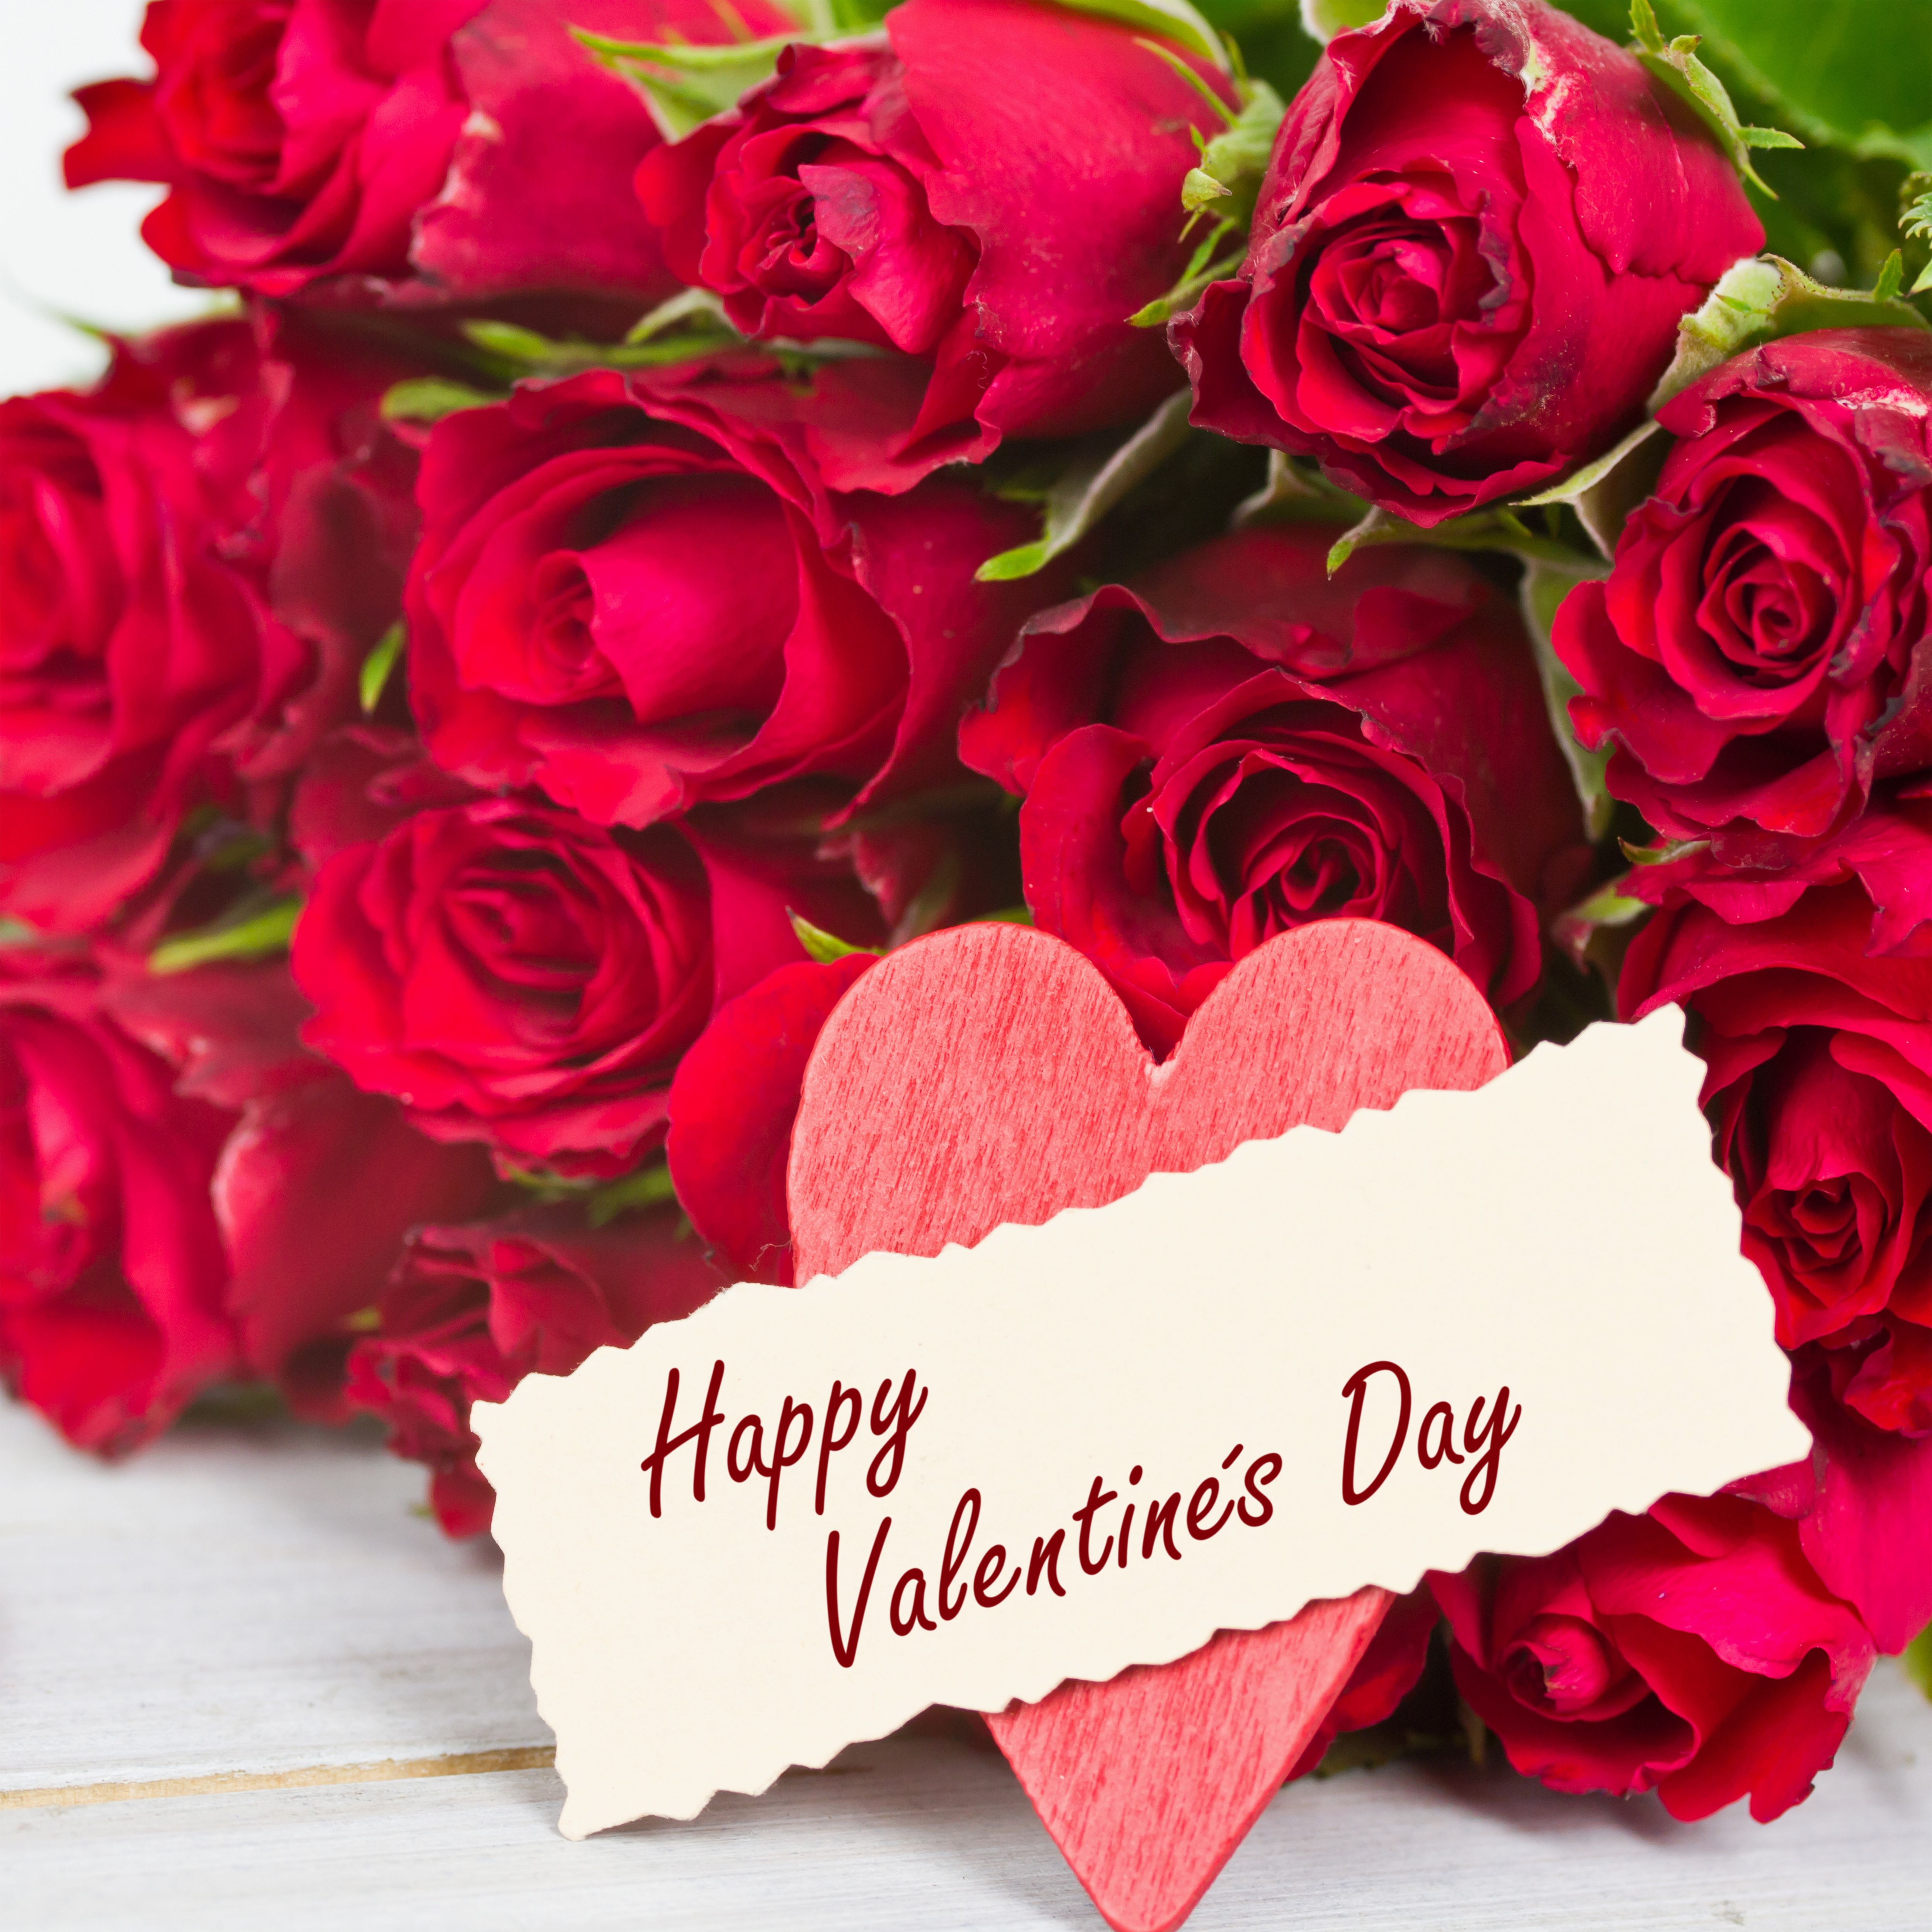 Roses Happy Valentine's Day Background Quality Image And Transparent PNG Free Clipart